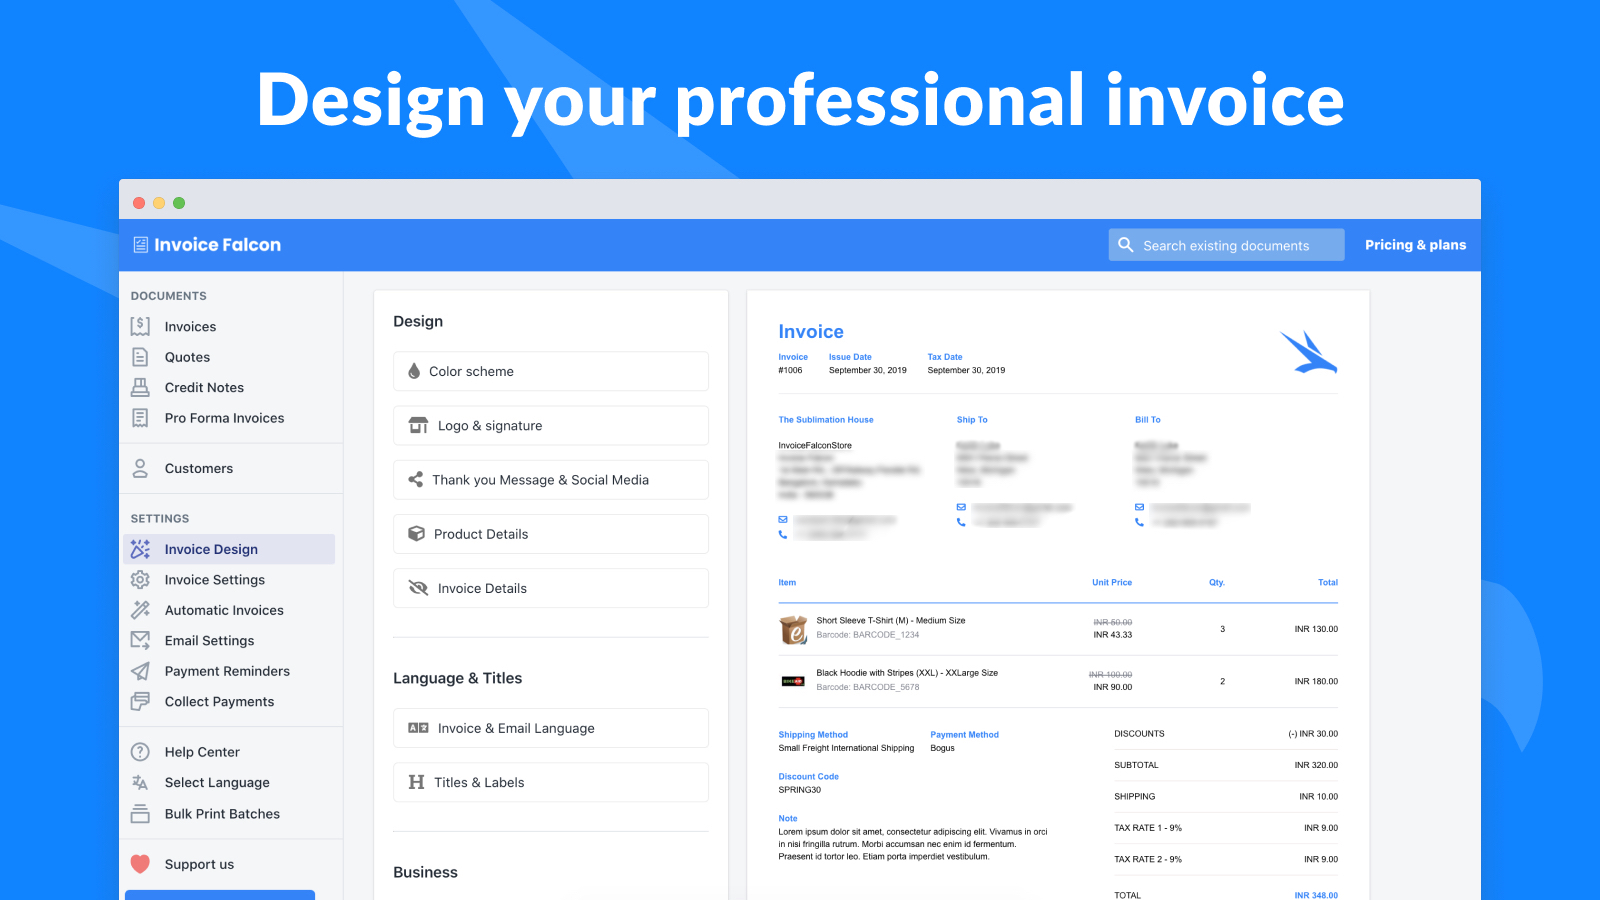 Easily design your professional invoice in a few clicks